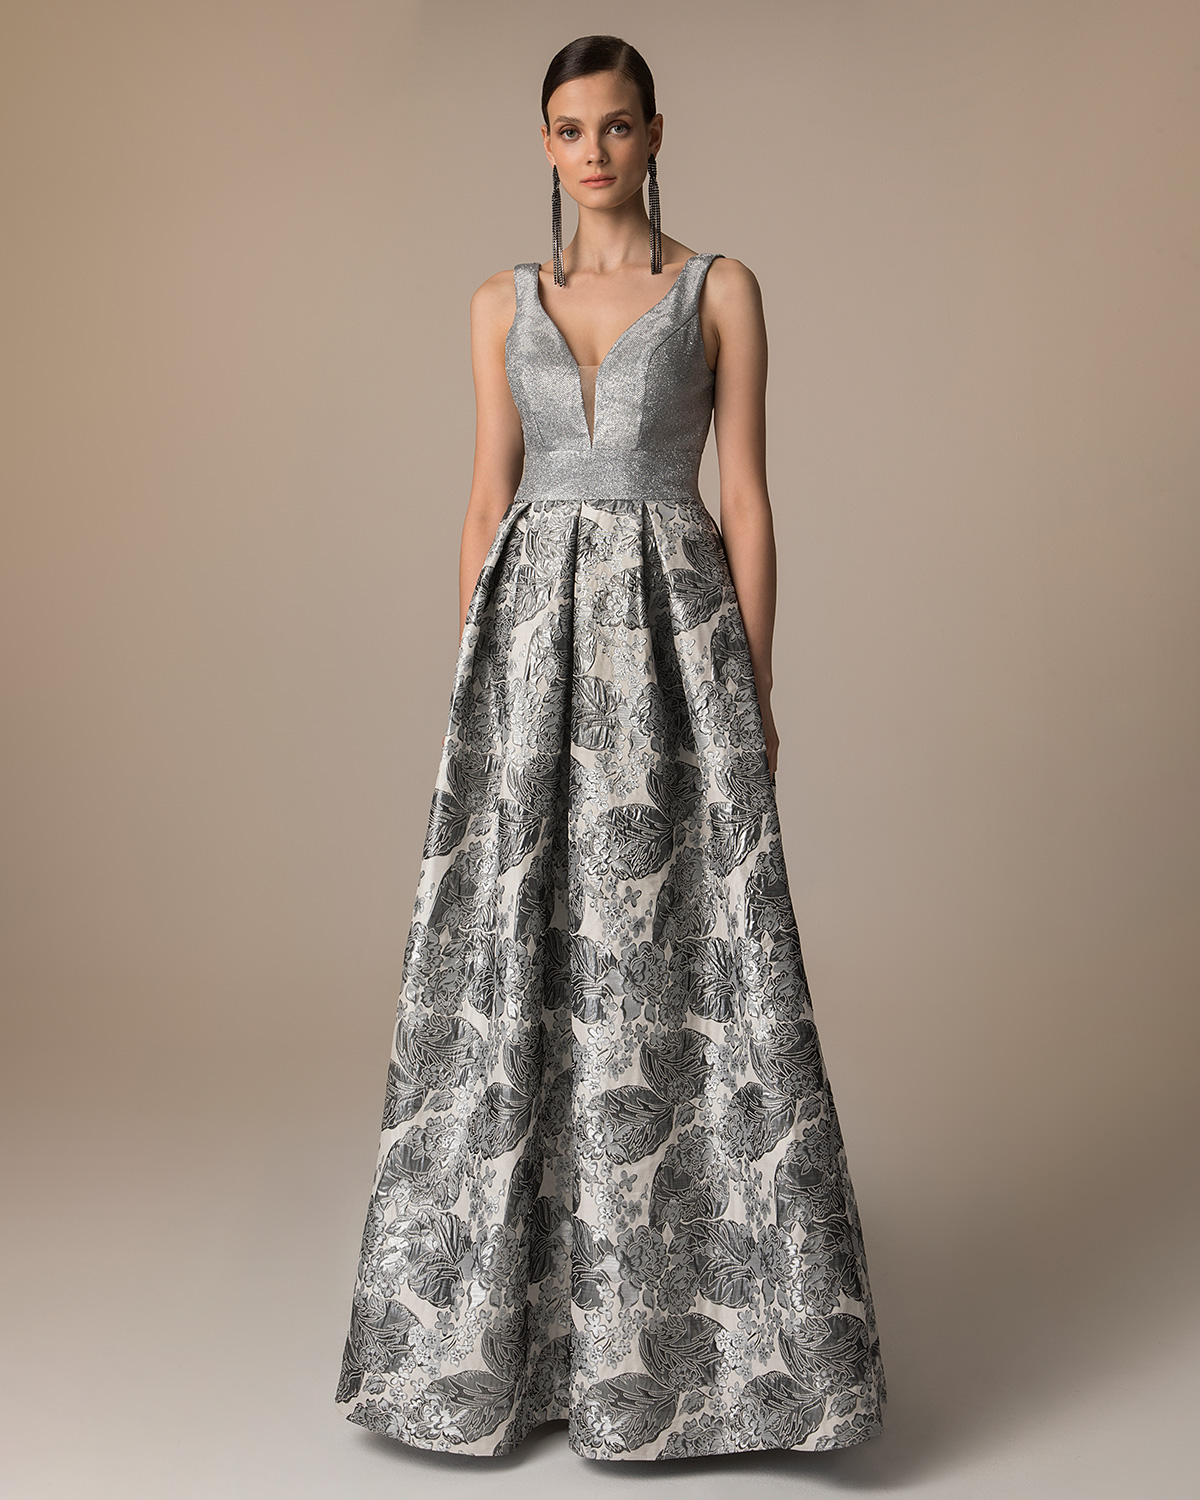 Long evening brocade dress with shining solid color top